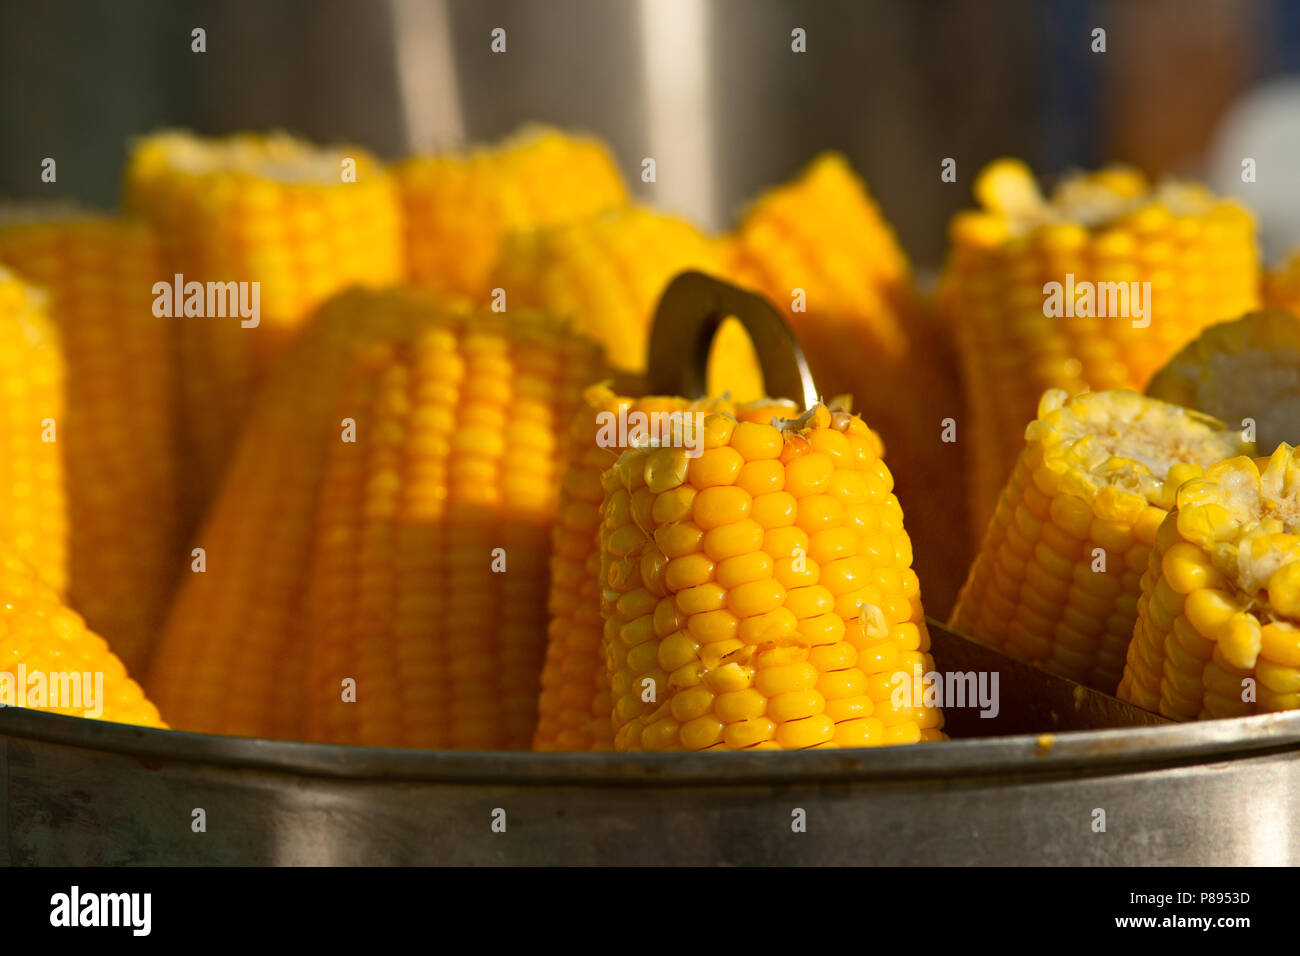 Corn on the cob boils in a metal pot. Fresh, steamy hot, yummy summer snack for everyone. Stock Photo